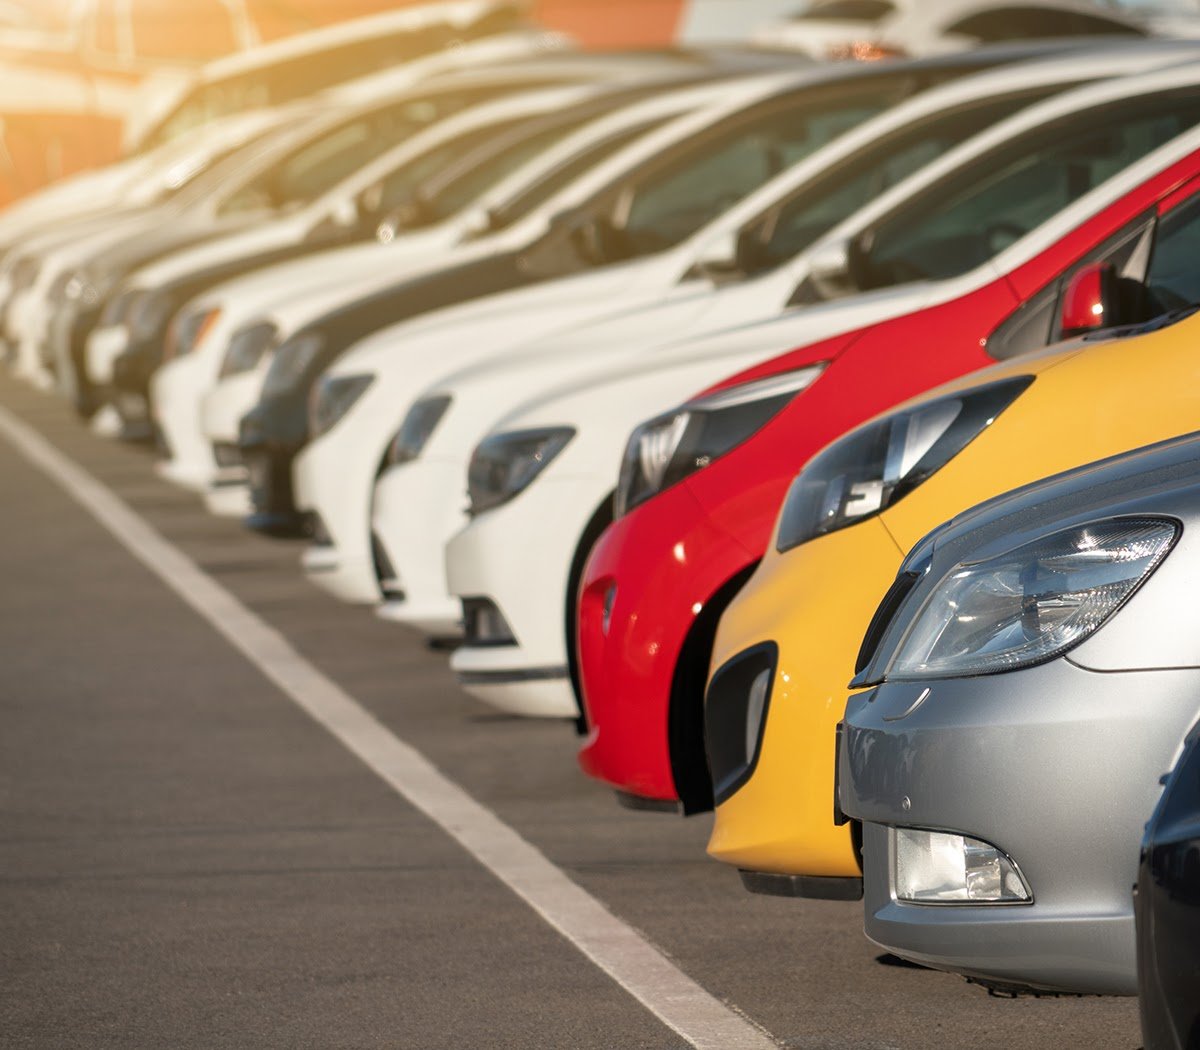 Car Dealership Marketing Ideas: 5 Ways to Get Your Vehicles off the Lot